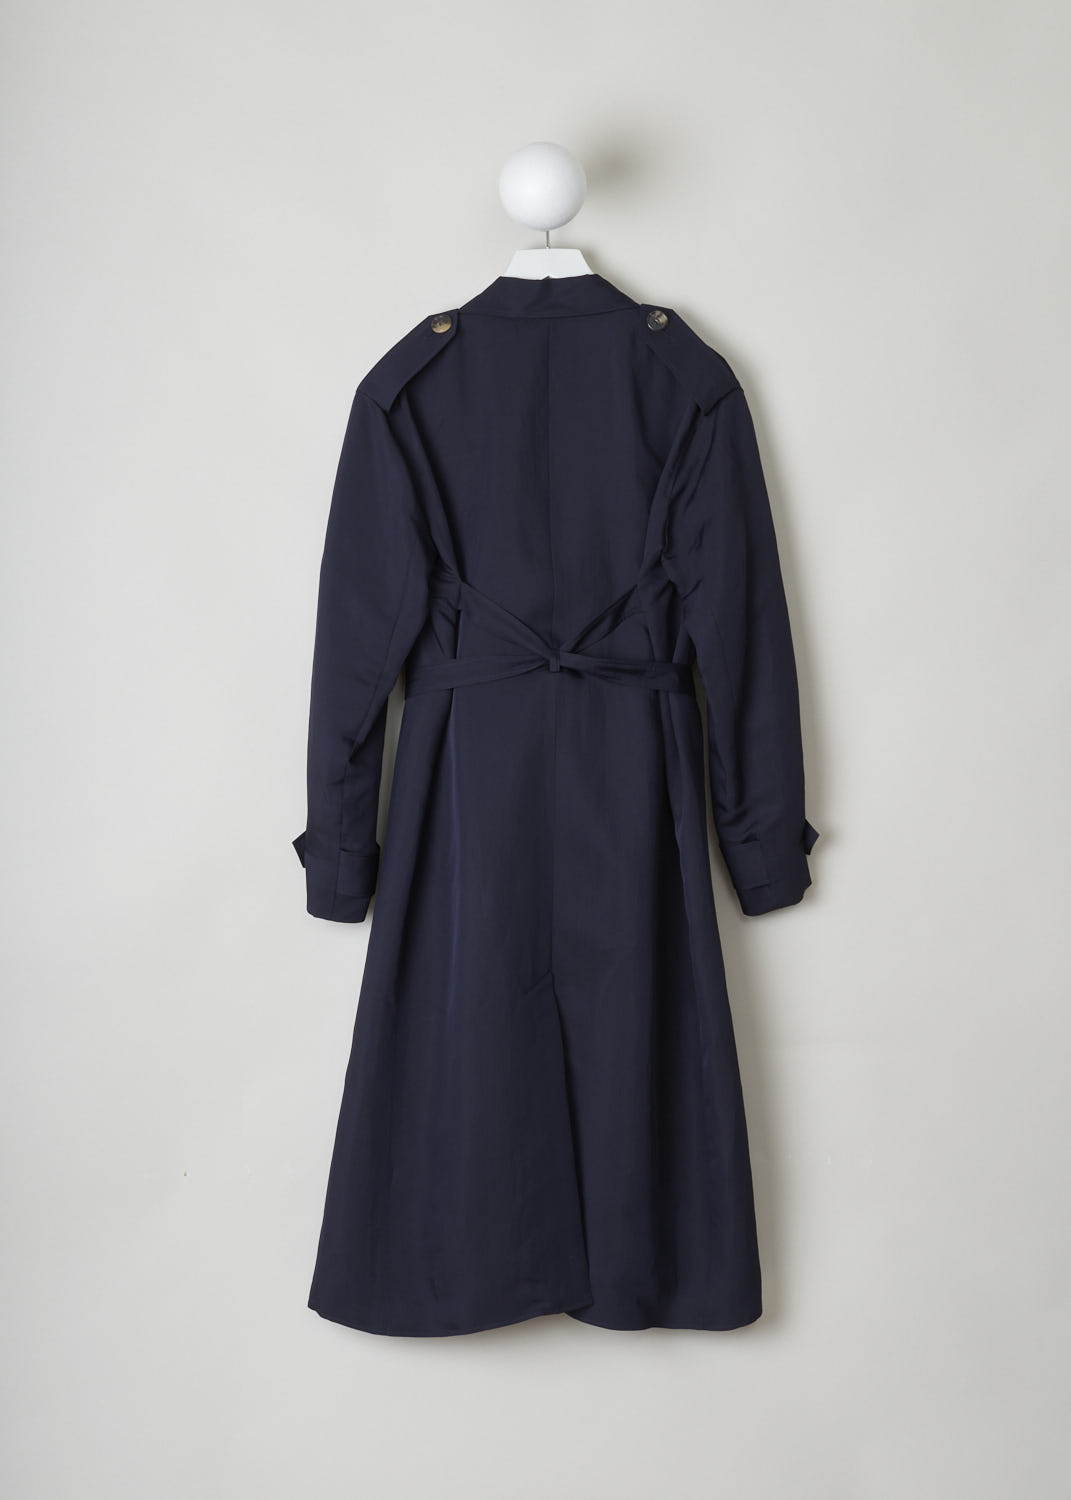 CÃ‰LINE, MIDNIGHT BLUE RAINCOAT, 6464_28U36_0MI_C01, Blue, Back, Elegant midnight blue trench coat. The coat has a notched lapel and classic details such as epaulets and storm flaps. Two rows of buttons form the closing option. The coat comes with a matching belt to cinch in the waist. The long sleeves have sleeve straps on the cuffs. A slanted pocket can be found on either side. In the back, the coat has a centre slit.